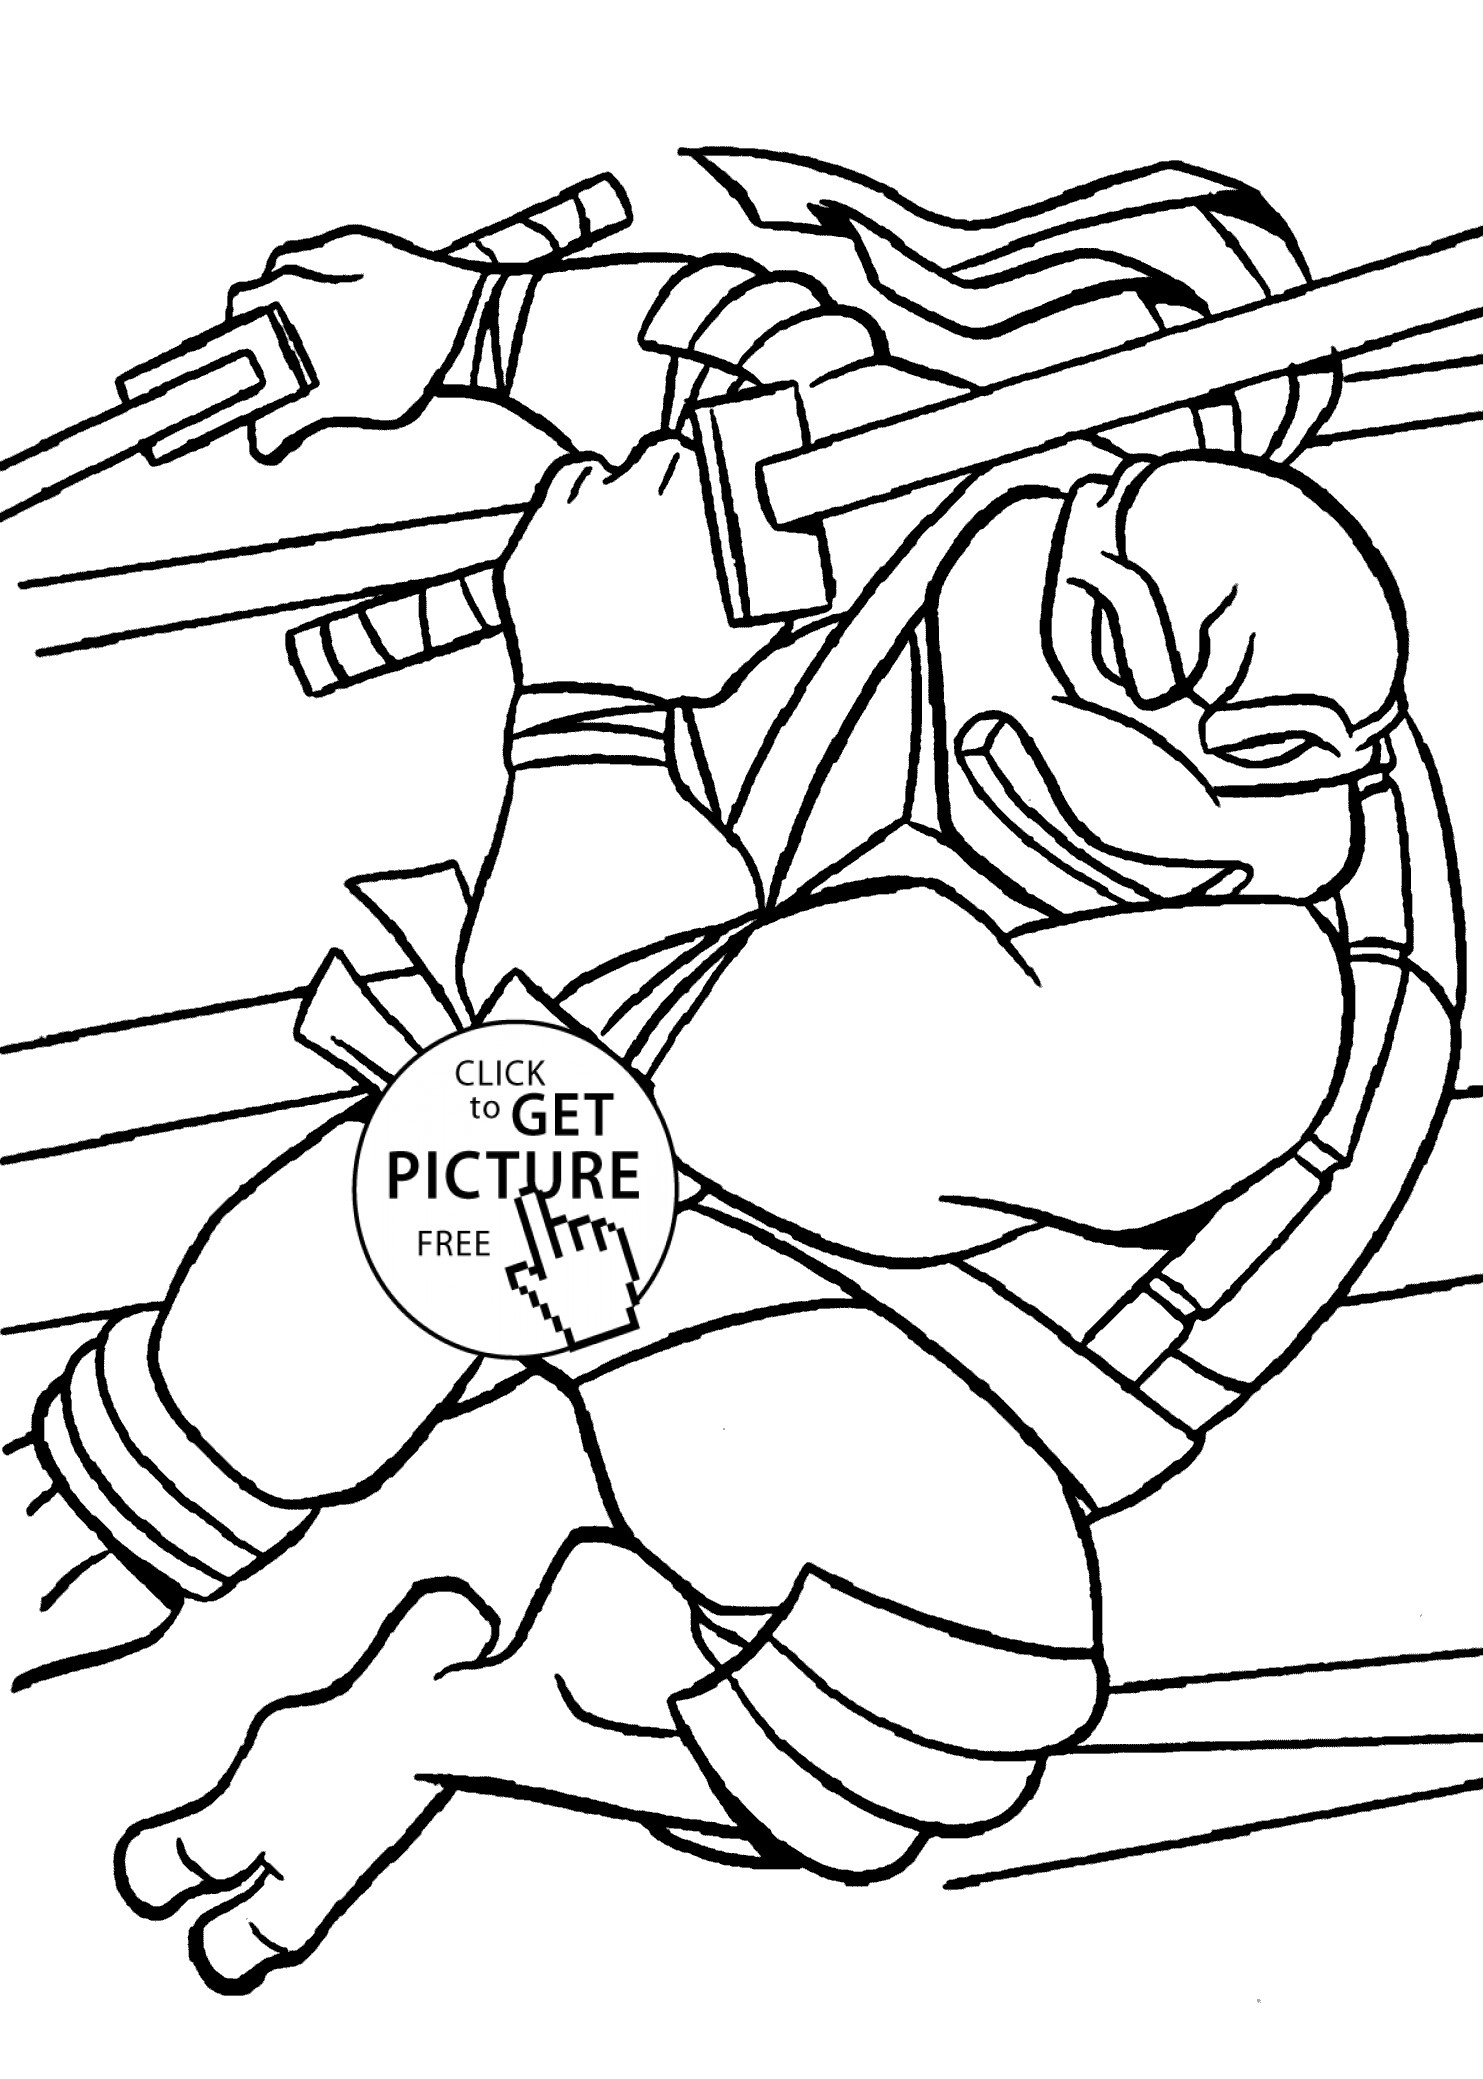 Ninja Coloring Pages For Kids
 Teenage Mutant Ninja coloring pages for kids